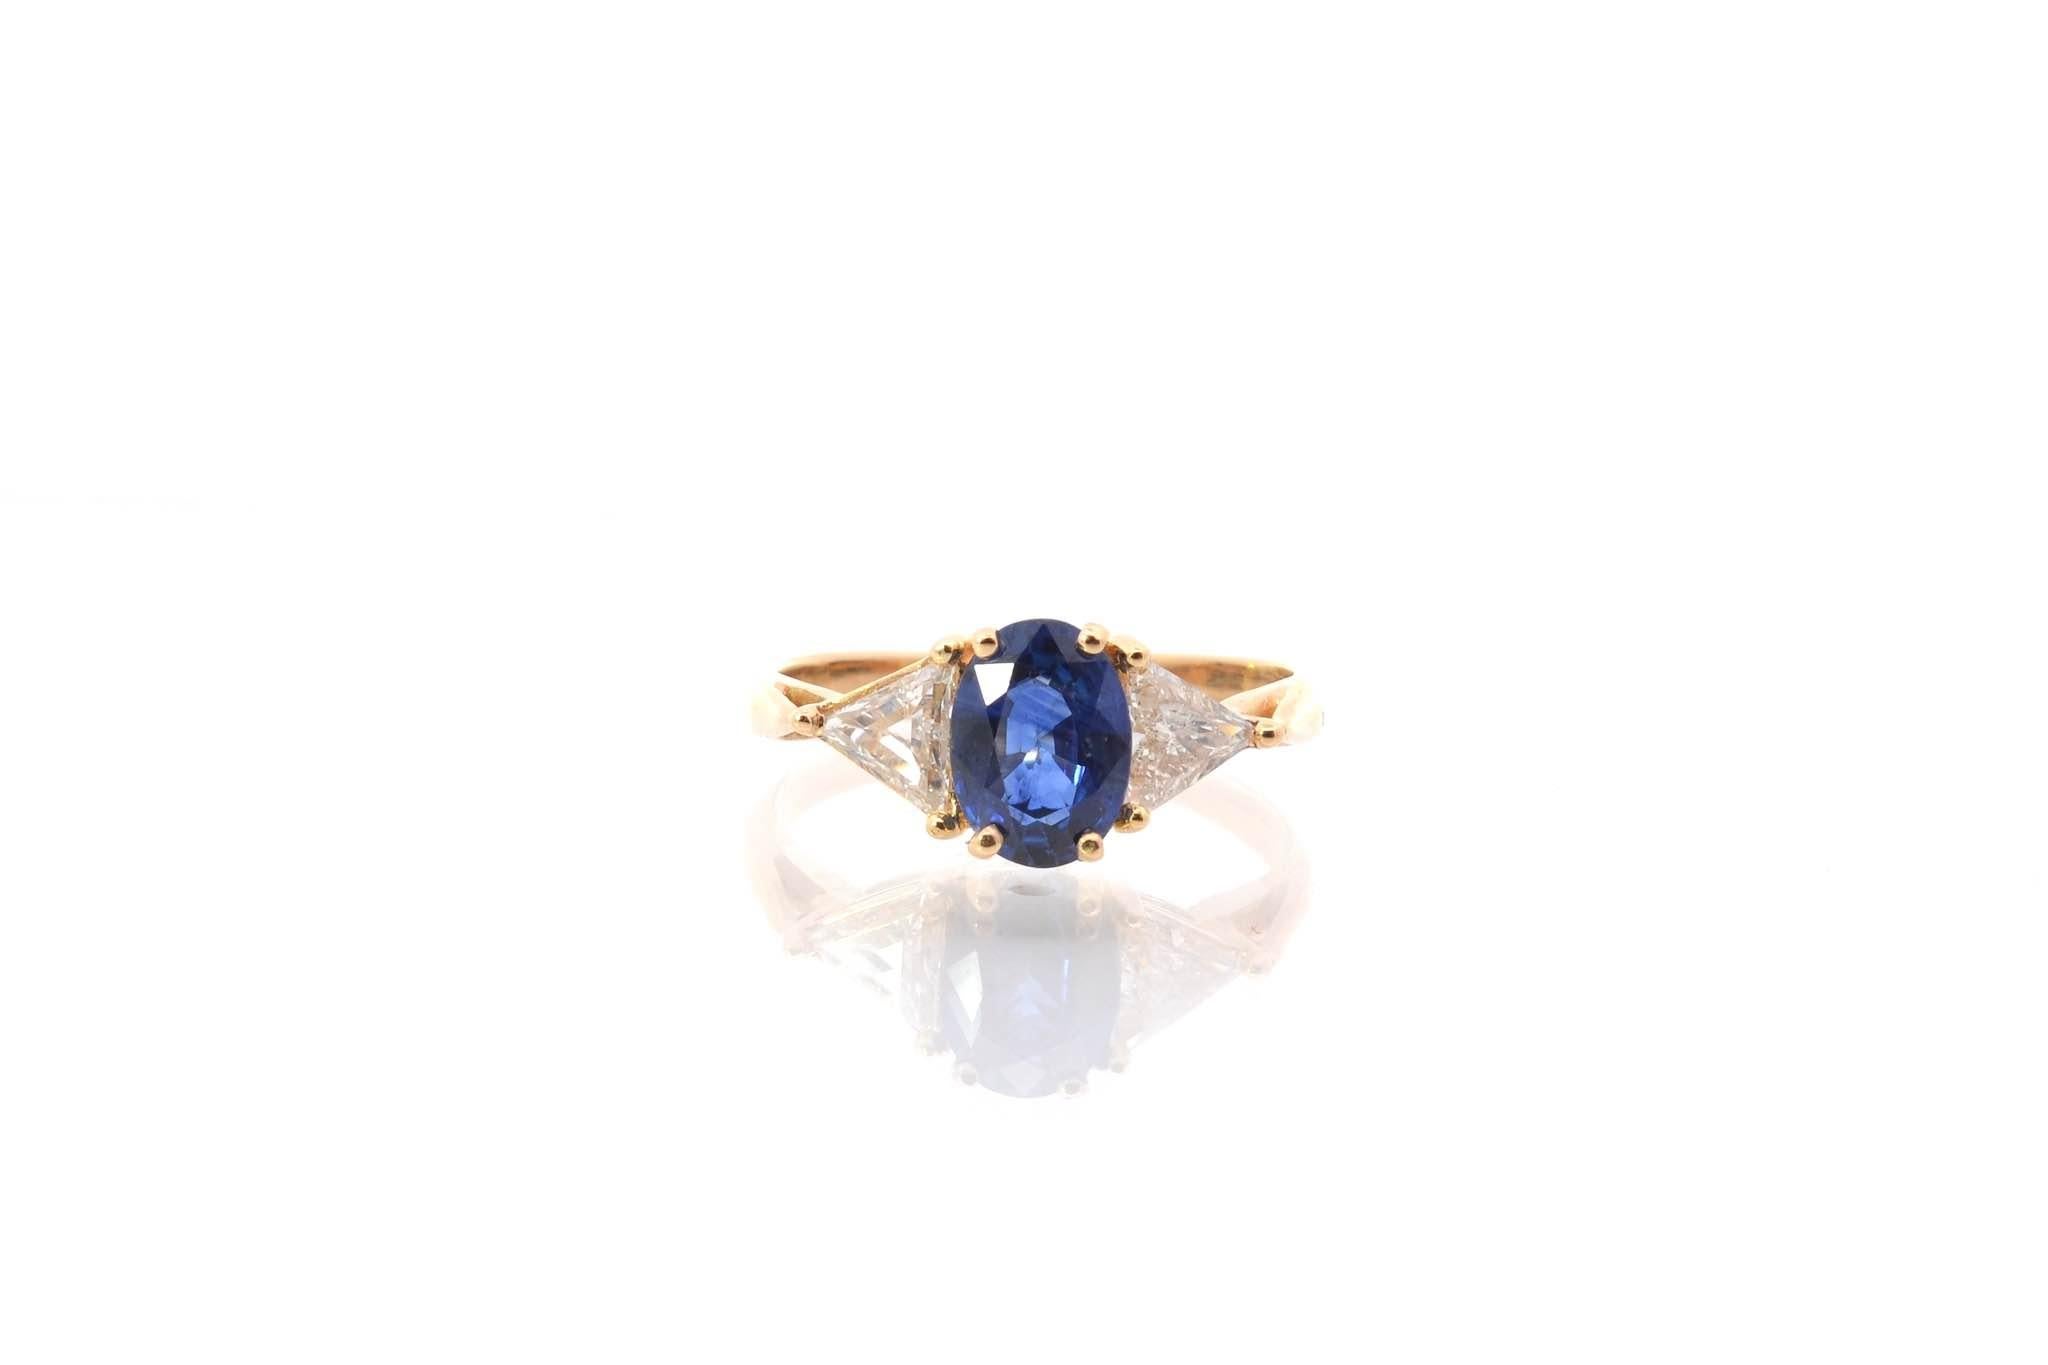 Stones: Oval sapphire: 1.60 cts and 2 triangle diamonds: 0.60 ct
Material: 18k yellow gold
Weight: 3.5g
Period: Recent vintage style
Size: 52 (free sizing)
Certificate
Ref. : 25551